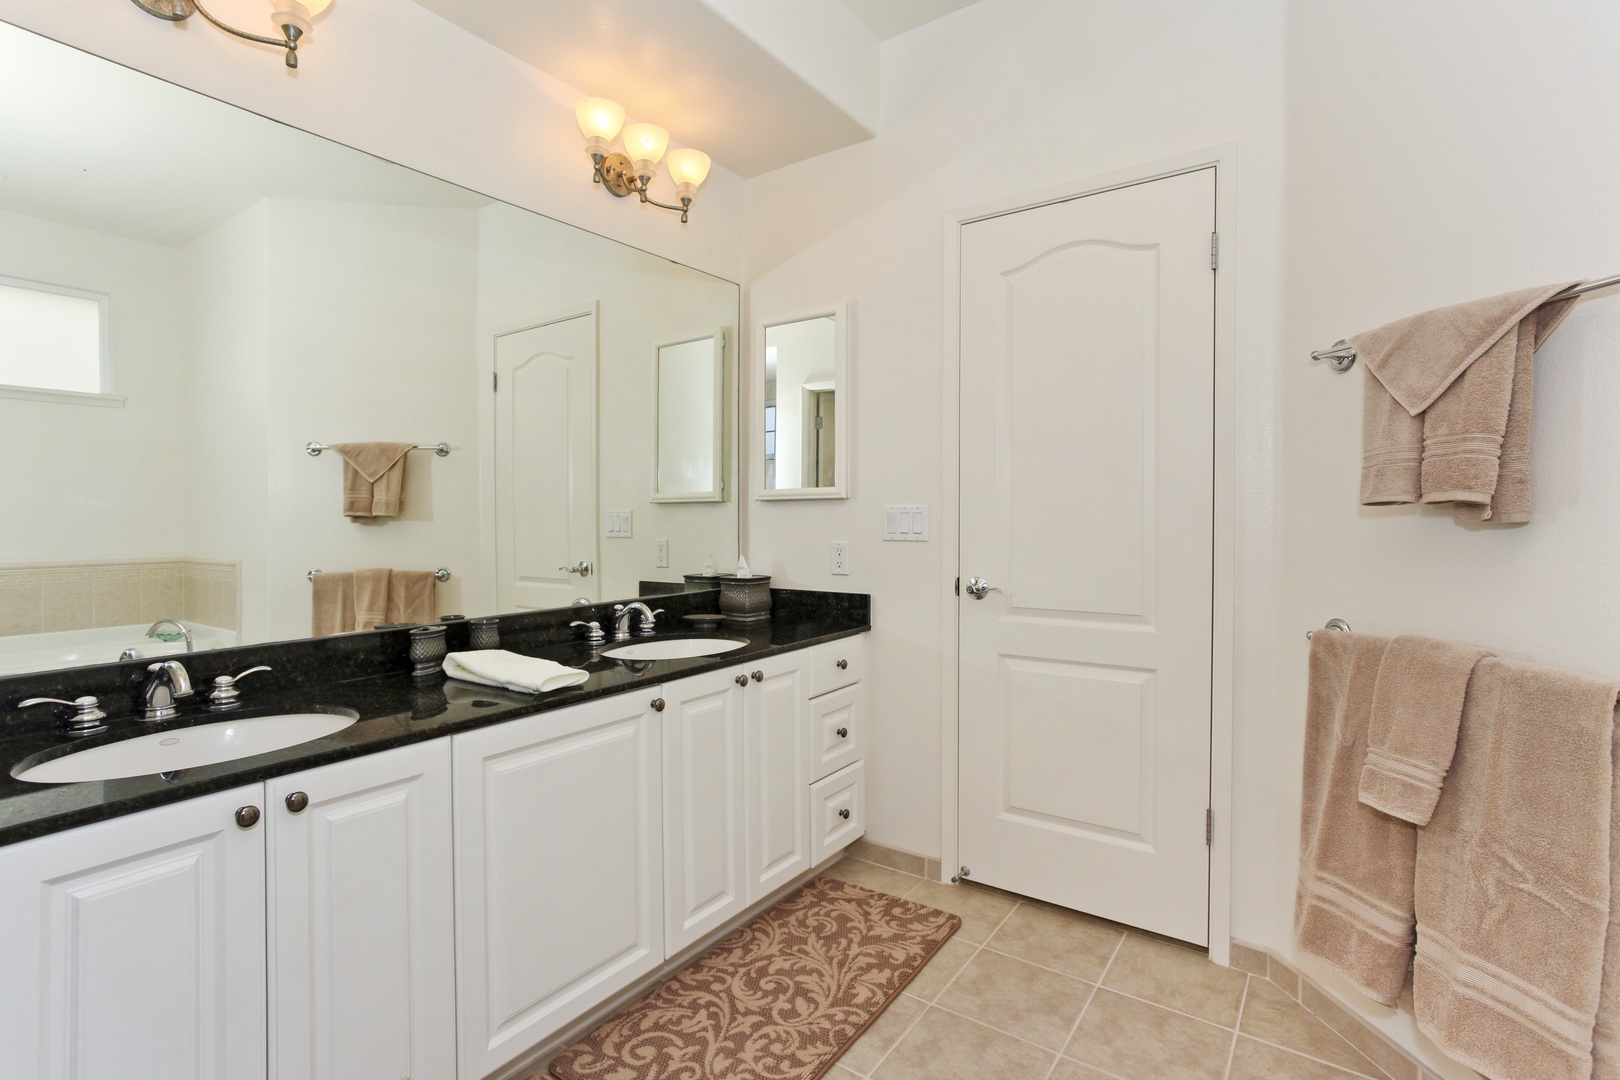 Kapolei Vacation Rentals, Ko Olina Kai Estate #20 - The primary guest bathroom with a large double vanity.